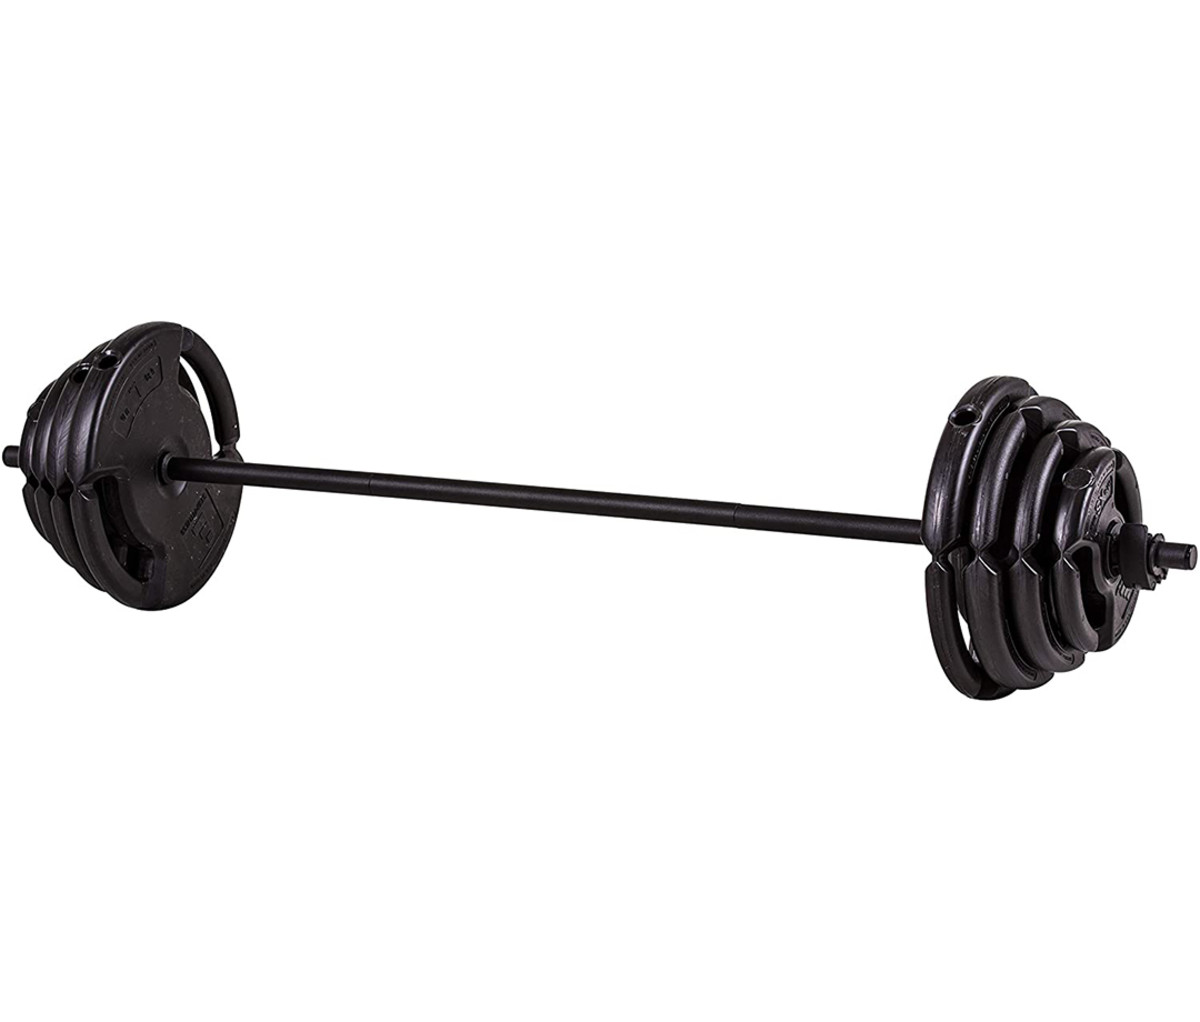 The Step Store Club Quality 4-Weight Deluxe Barbell Set